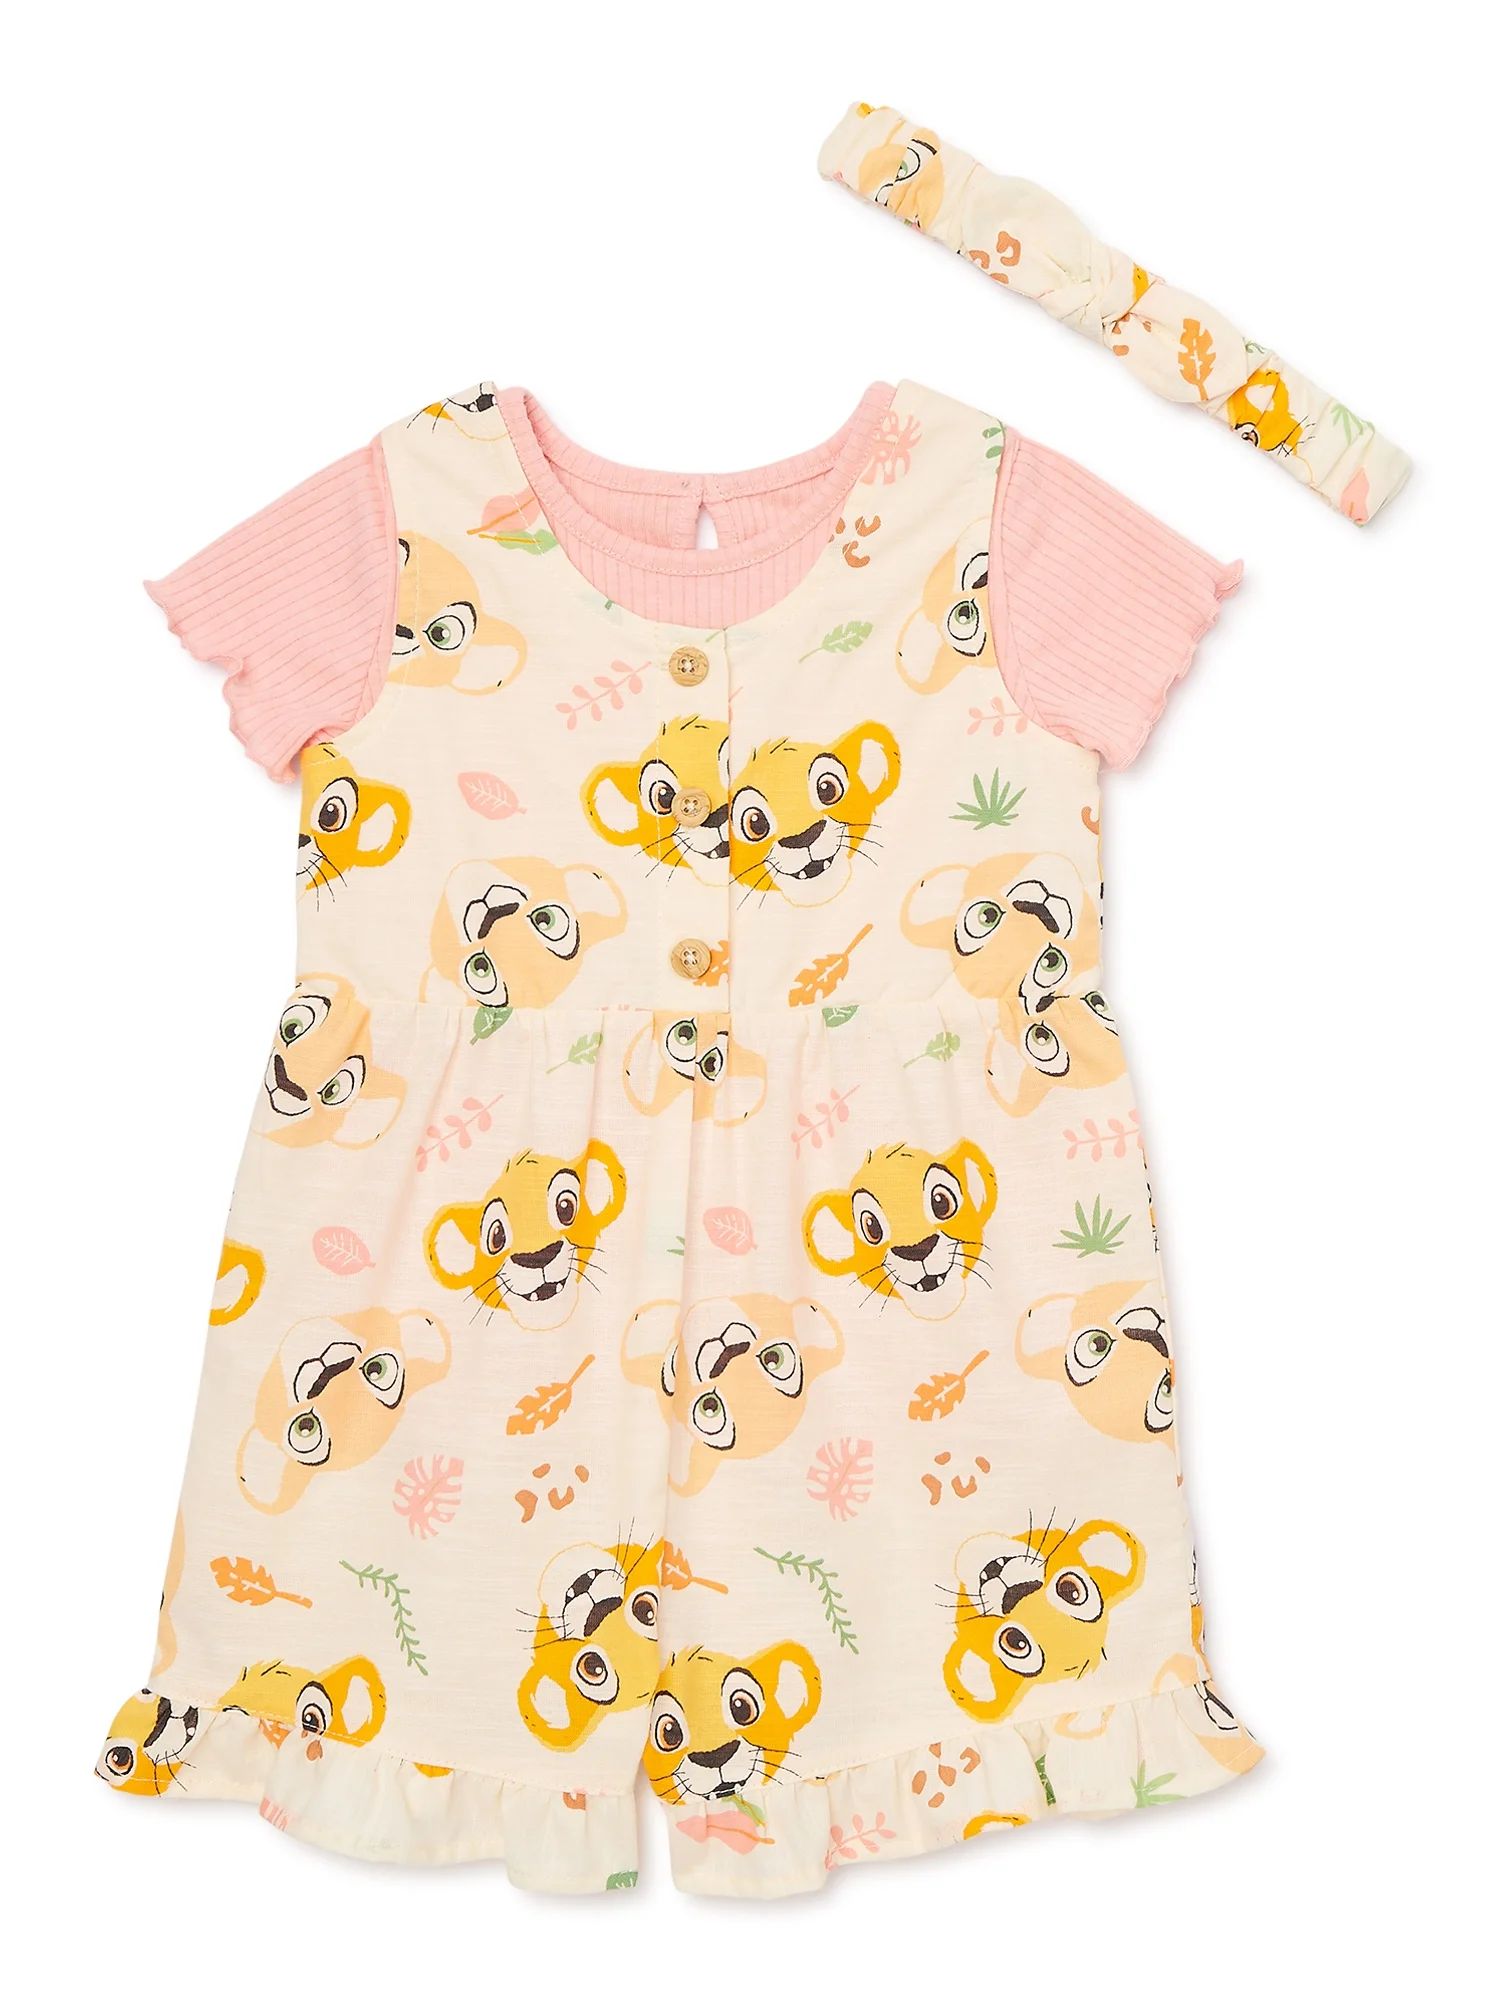 The Lion King Baby Girl Shortall and Tee Outfit Set with Headband, Sizes 0/3M-24M | Walmart (US)